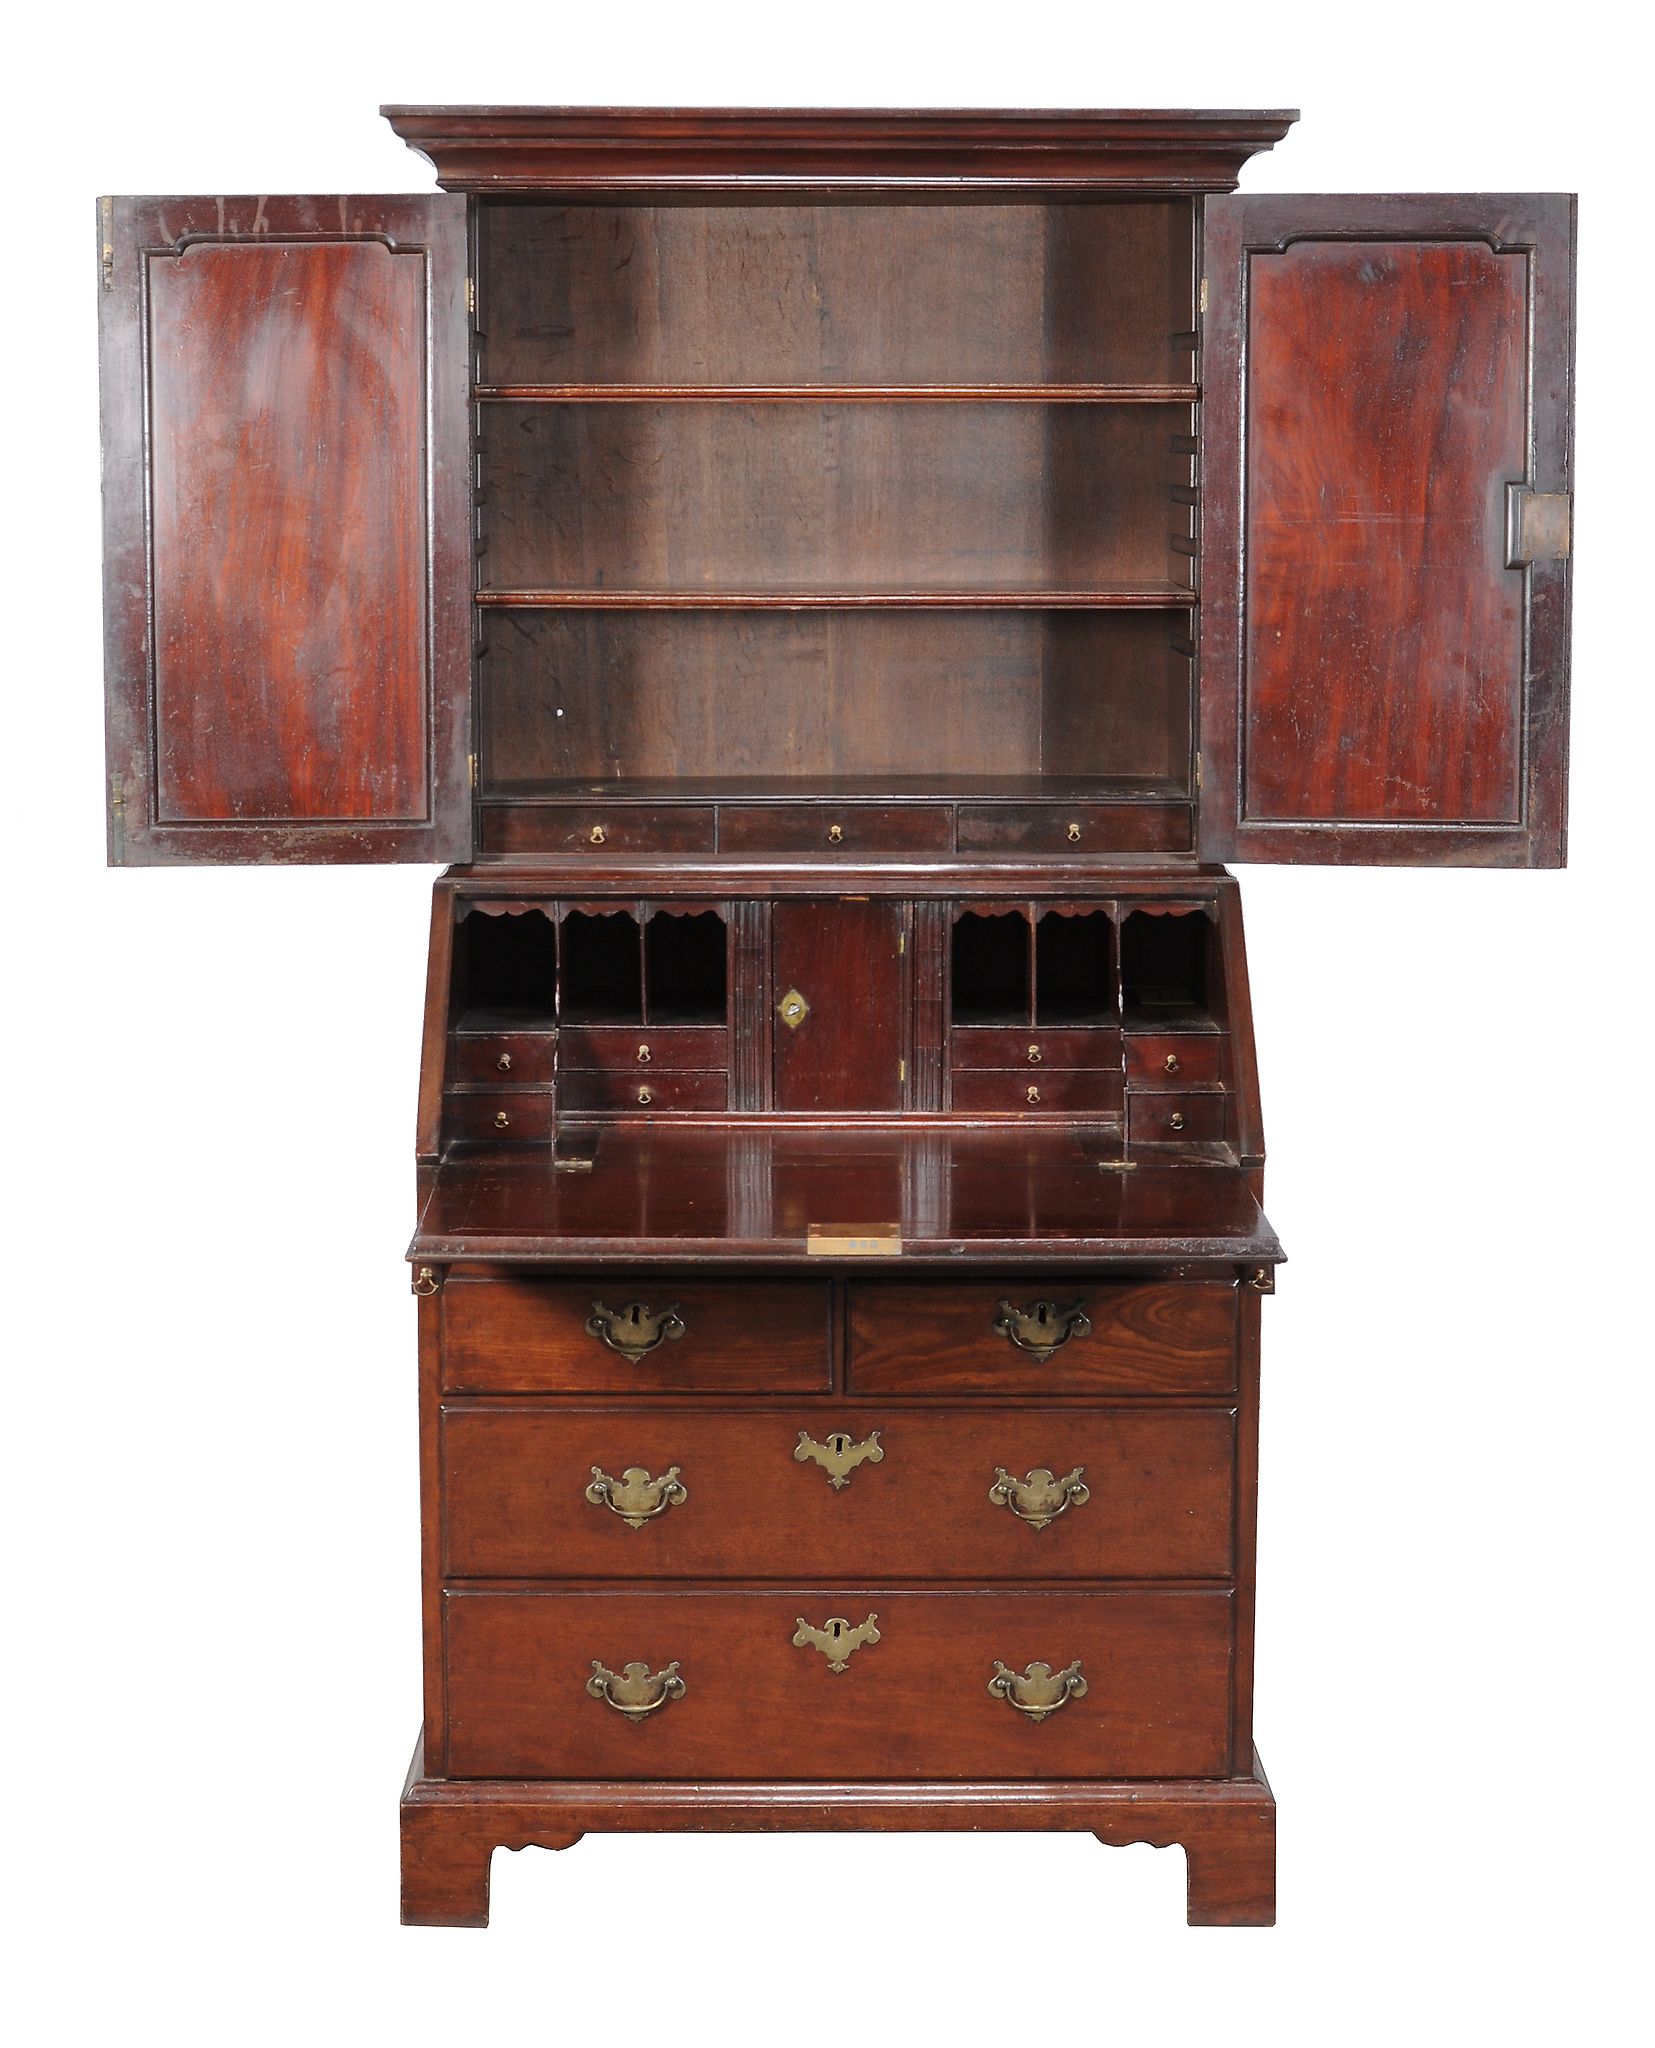 A George II mahogany bureau cabinet, circa 1750, the moulded cornice above a pair of panelled doors - Image 2 of 5